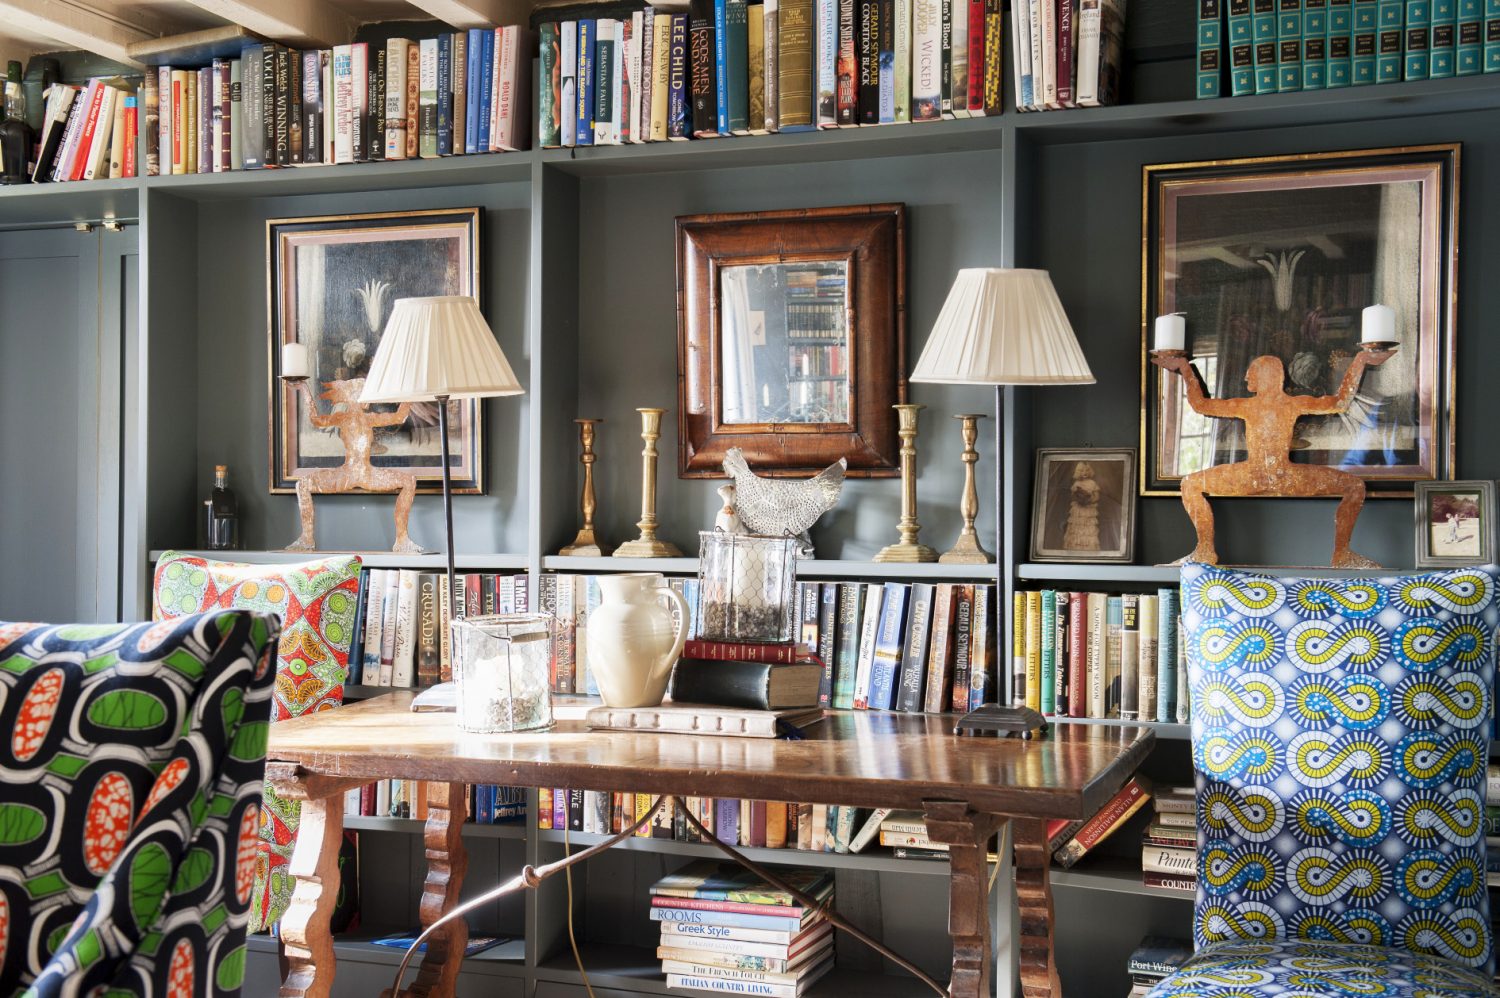 In the dining room the walls and bookcases are painted a dark grey – though Ally has managed to keep the room from feeling dark and oppressive by painting the ceiling and its beams off-white